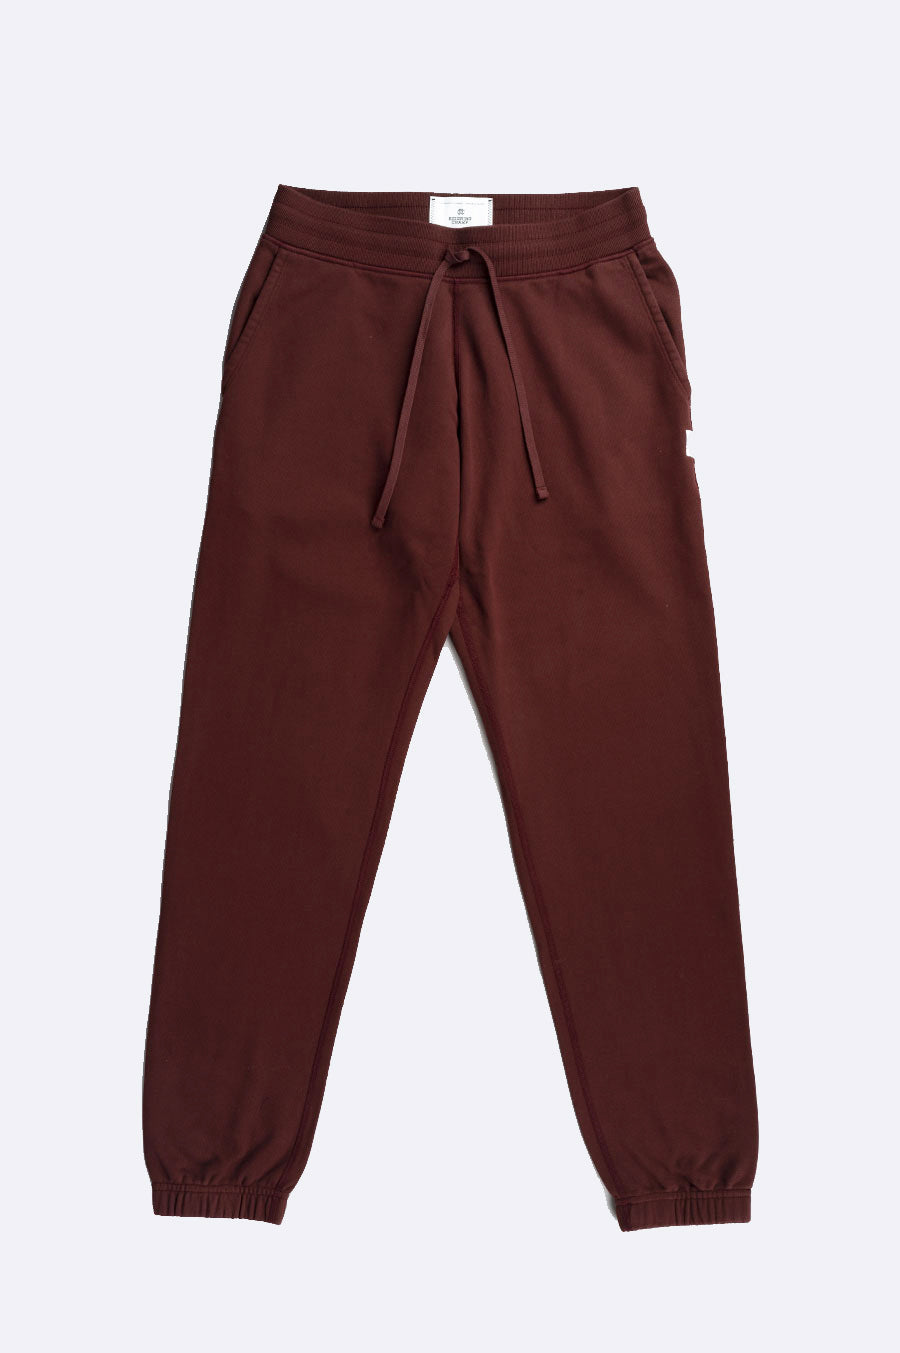 REIGNING CHAMP KNIT MIDWEIGHT TERRY CUFFED SWEATPANT CRIMSON